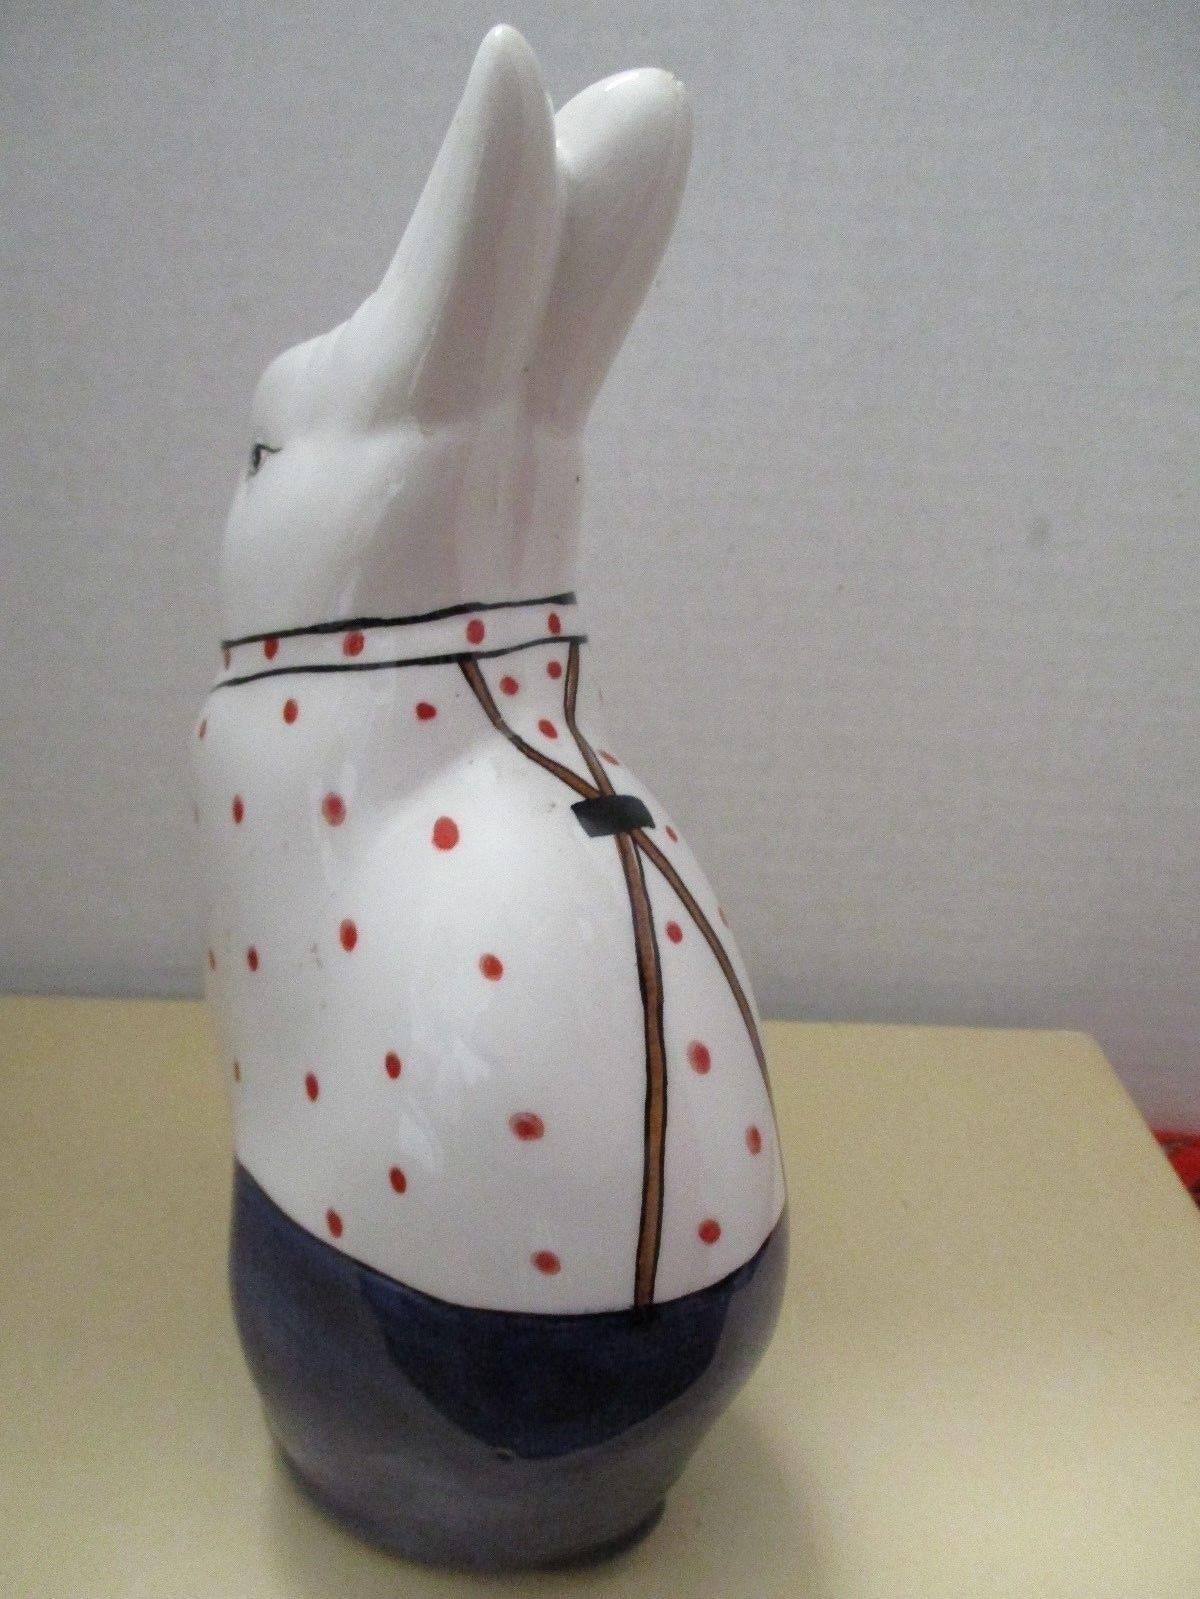 Italian Big Eared Old Rabbit Hand-Painted and Hand Glazed